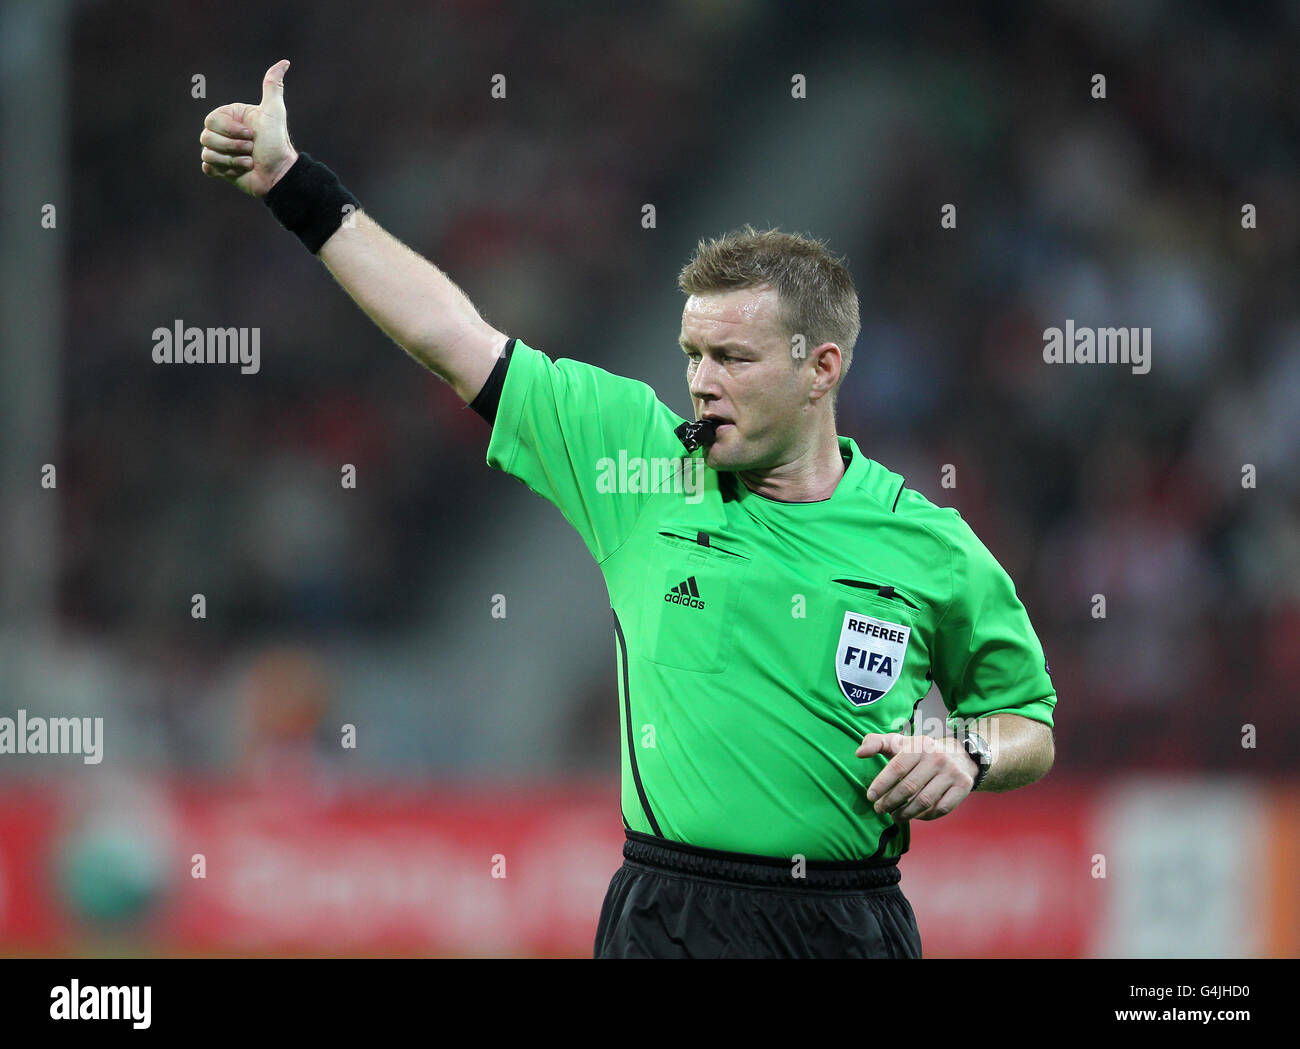 Irish League Referee High Resolution Stock Photography and Images - Alamy